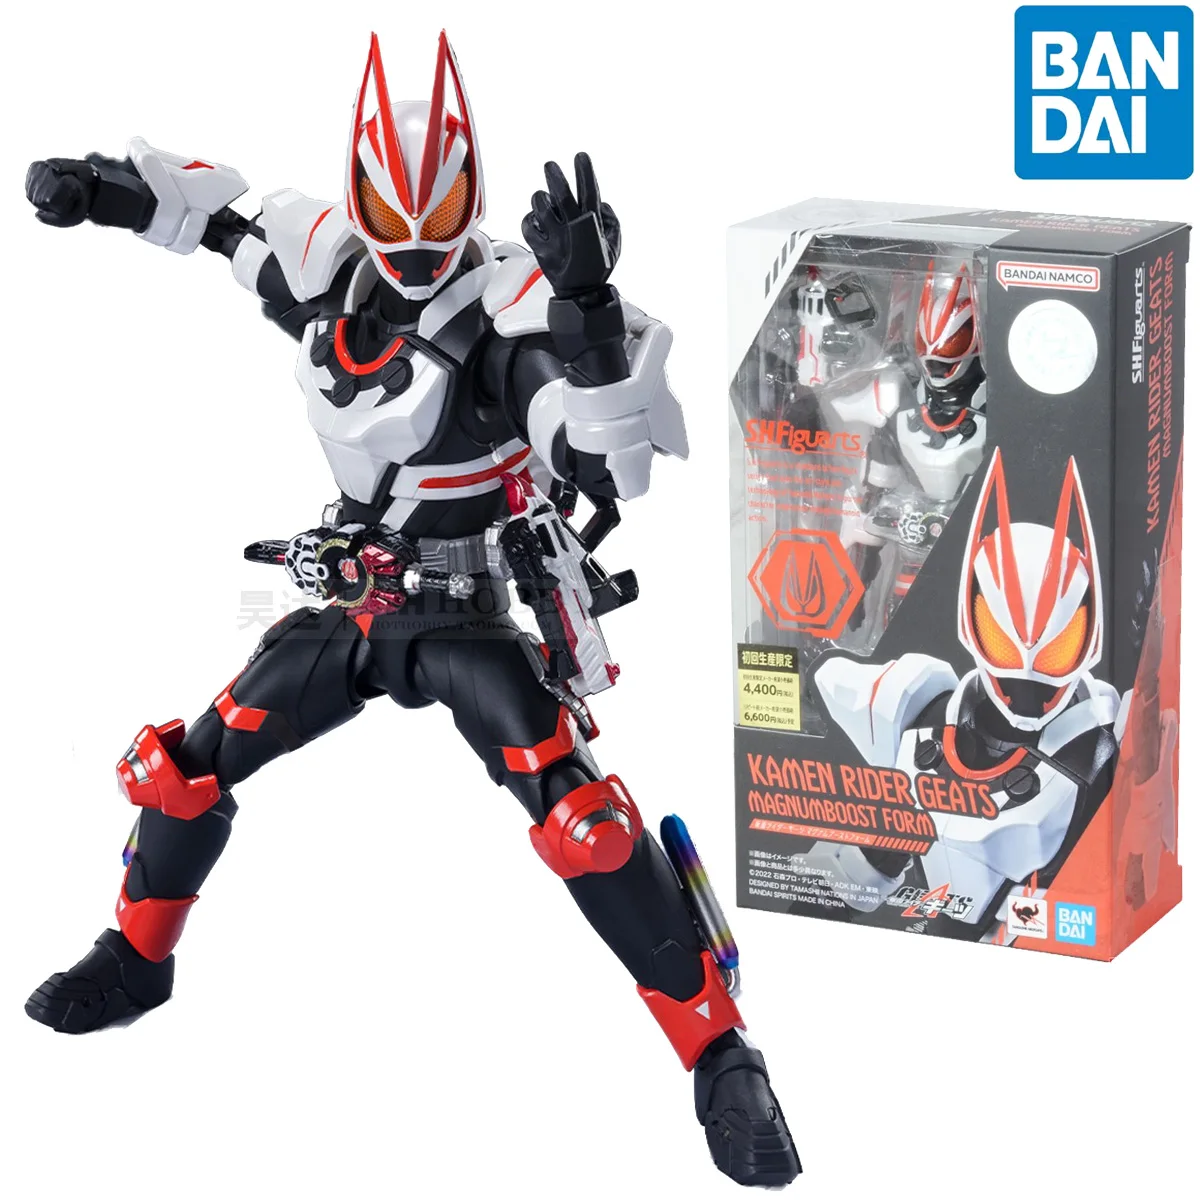 

In Stock Original BANDAI SPIRITS S.H.Figuarts SHF KAMEN RIDER GEATS MAGNUMBOOST FORM Anime Figure Model Action Toys Gifts